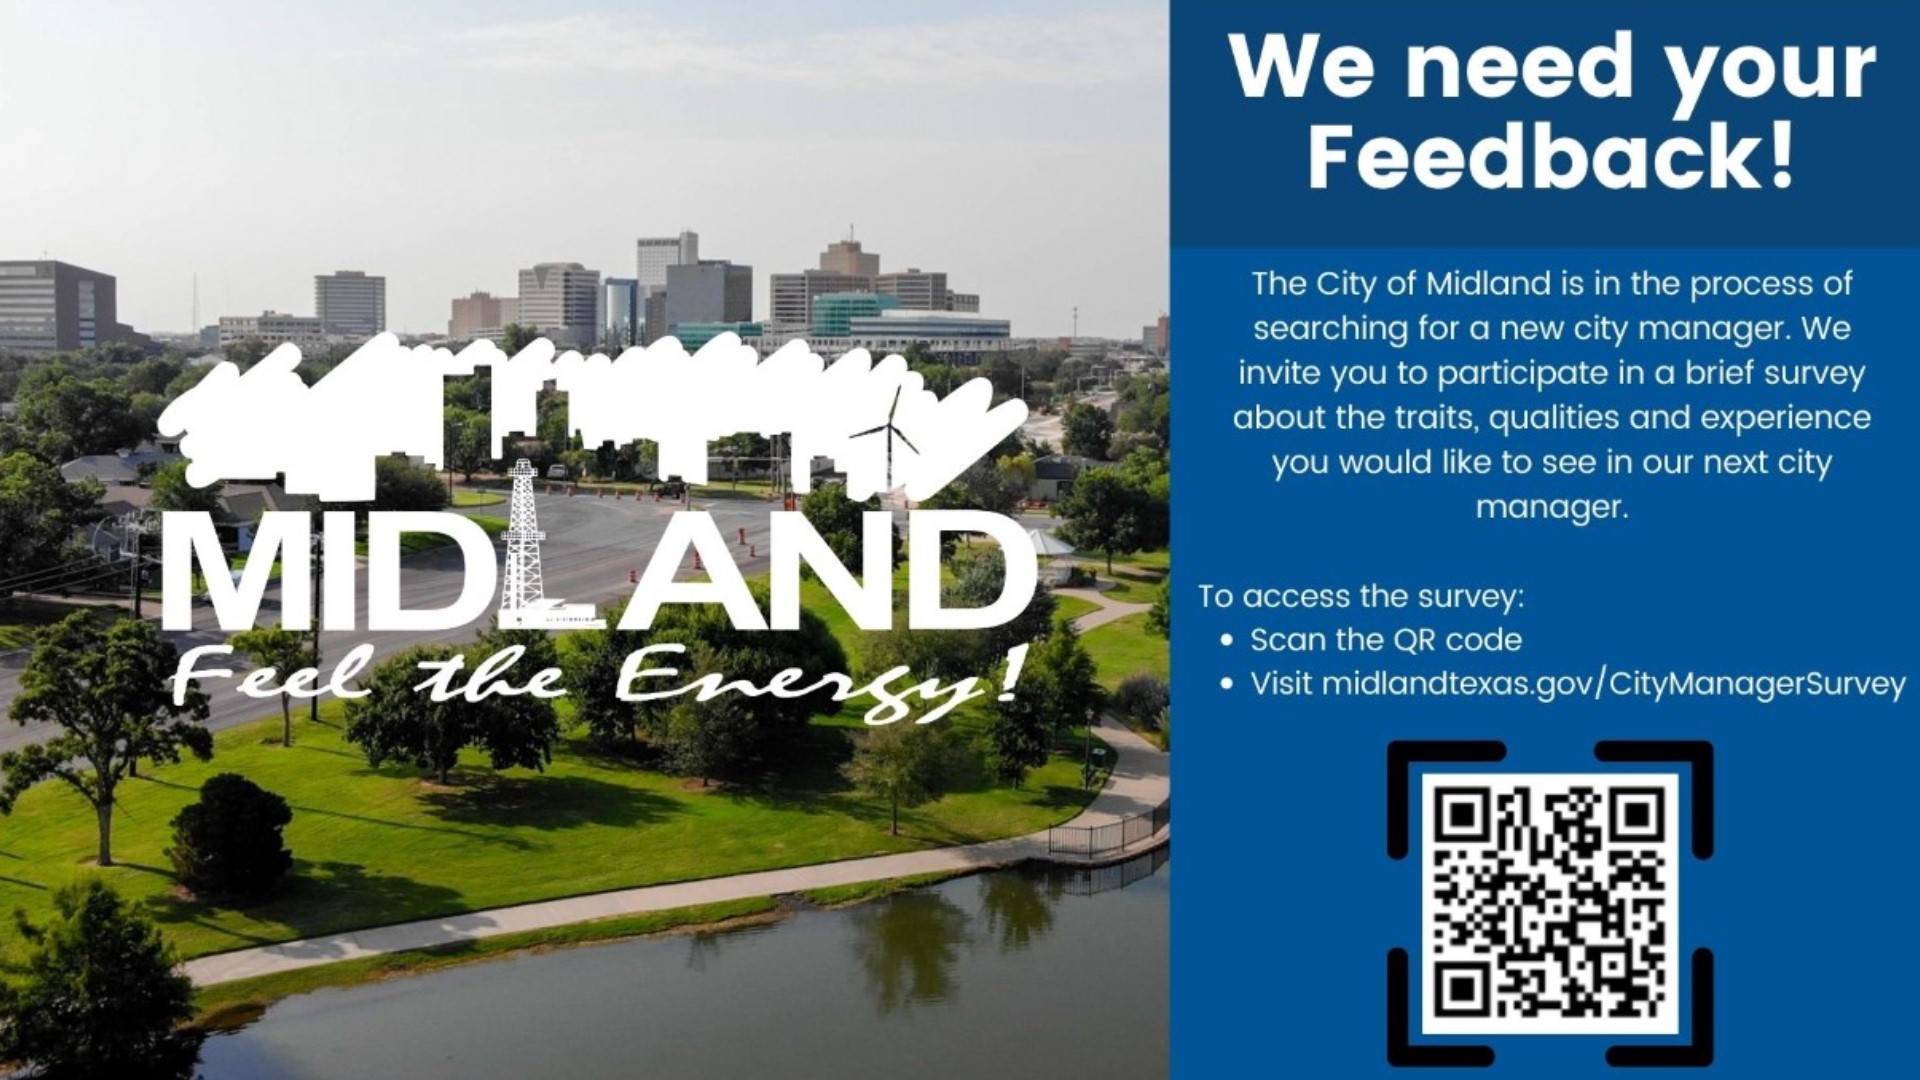 The public survey gives the community the opportunity to help in the search process. Midland Mayor Lori Blong said the city has not received a lot of responses yet.